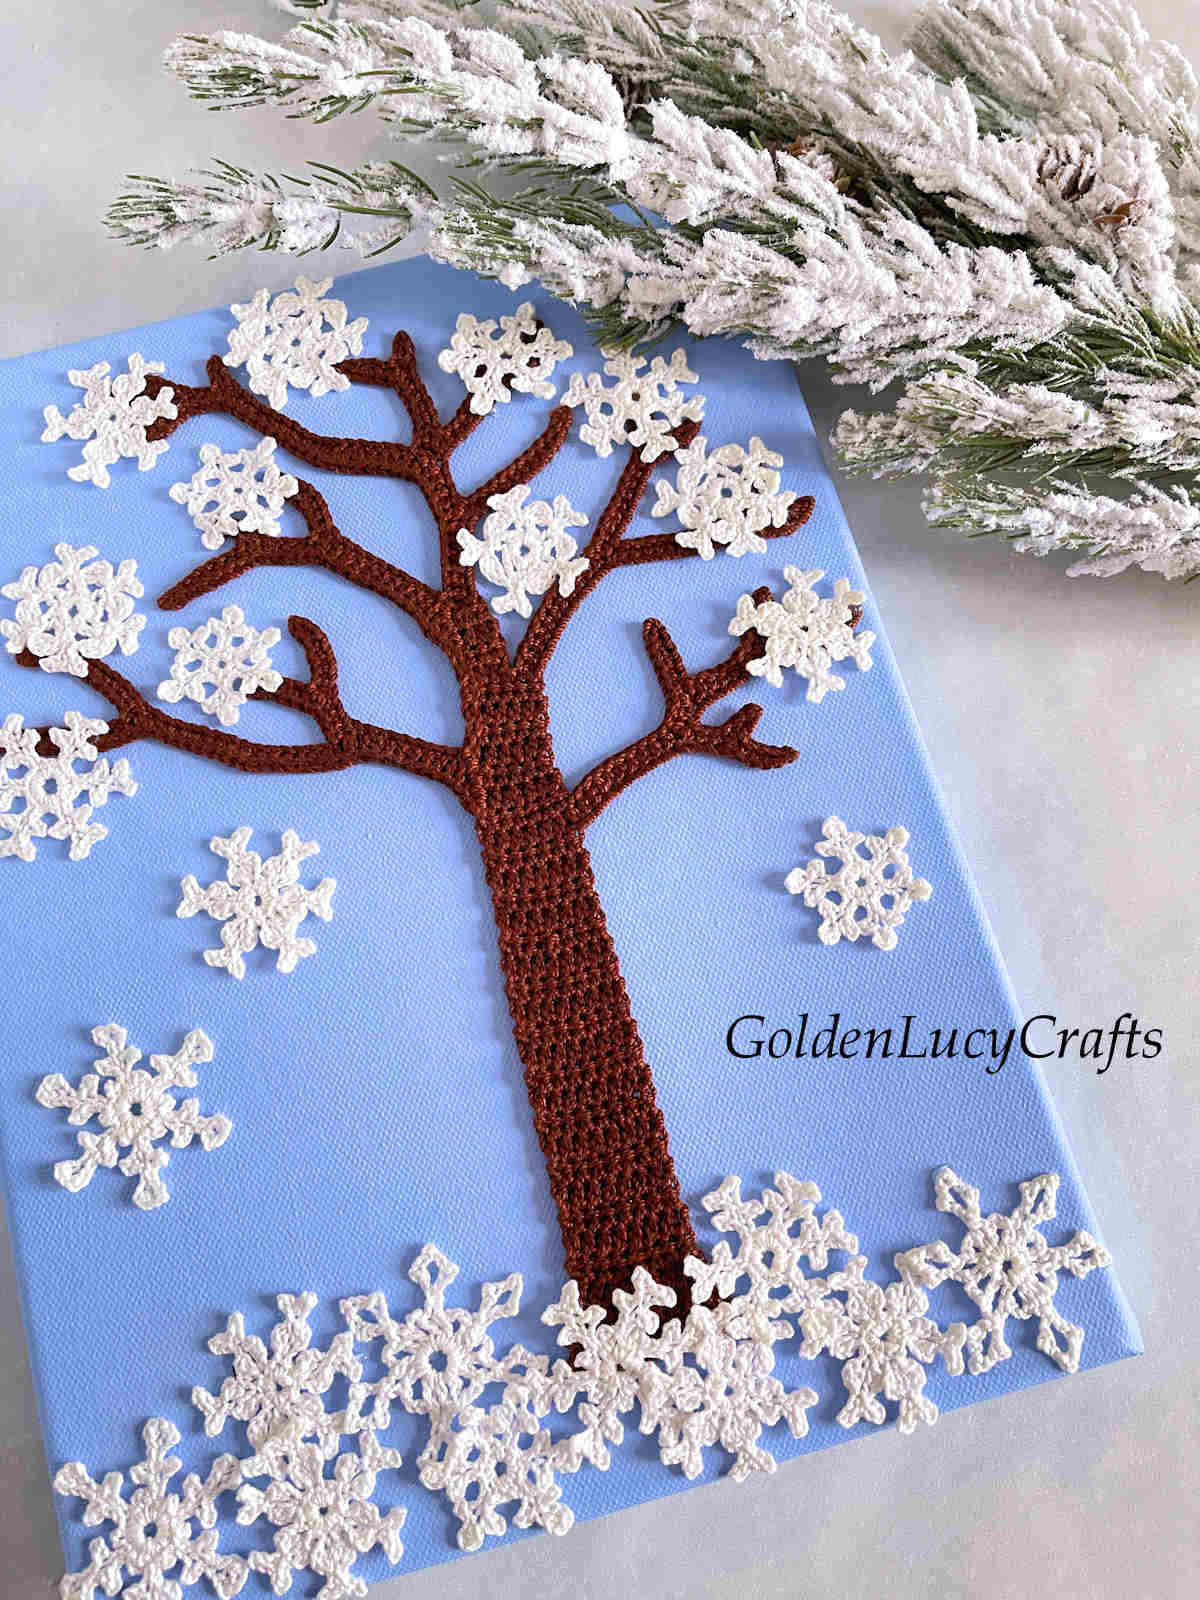 Crochet winter tree close up picture.